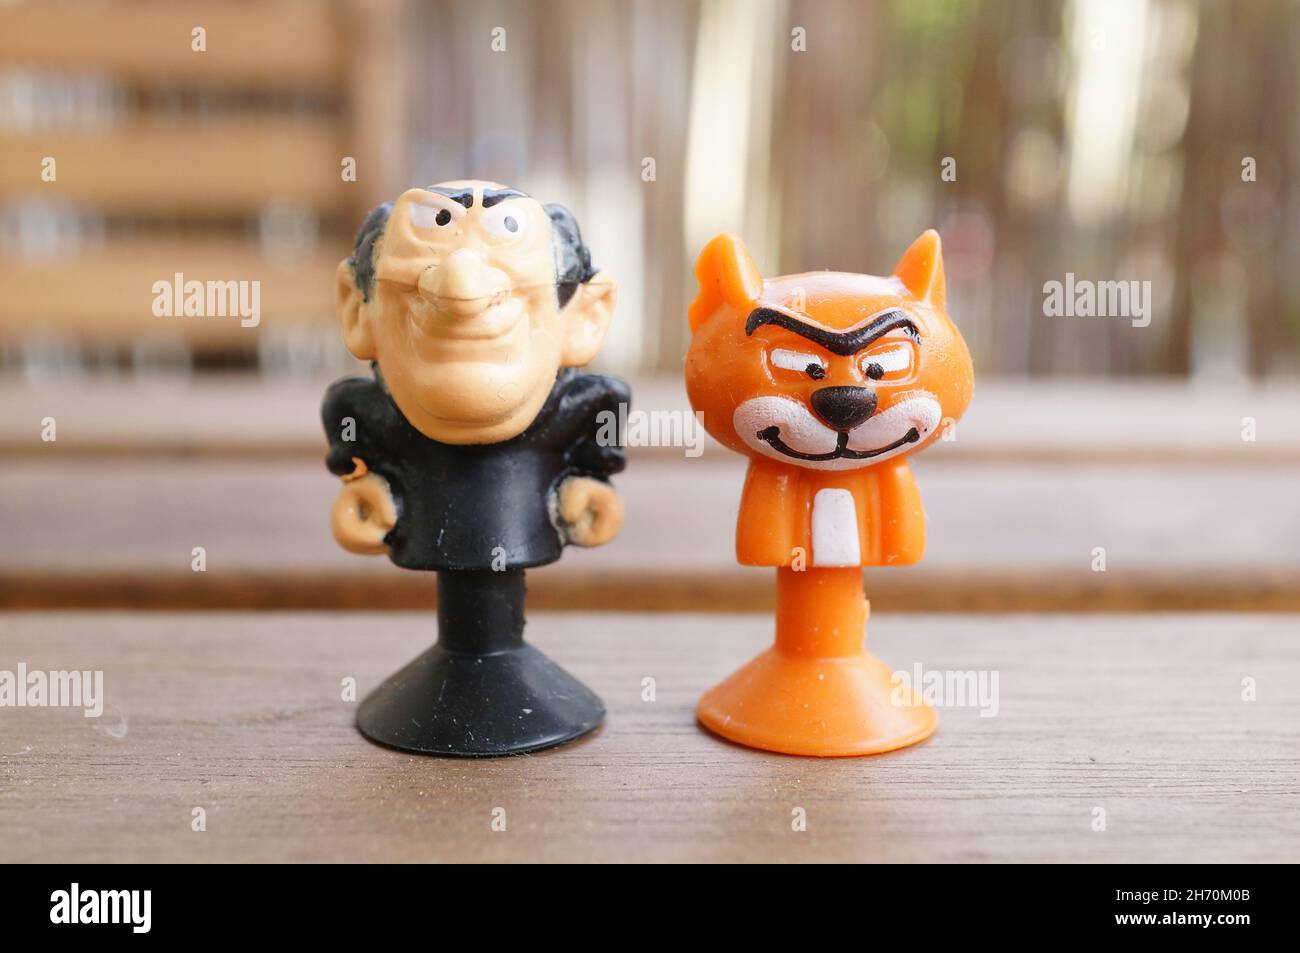 POZNAN, POLAND - May 14, 2017: A closeup shot of Gargamel and Asrael cat toy figurines from the Smurfs movie Stock Photo